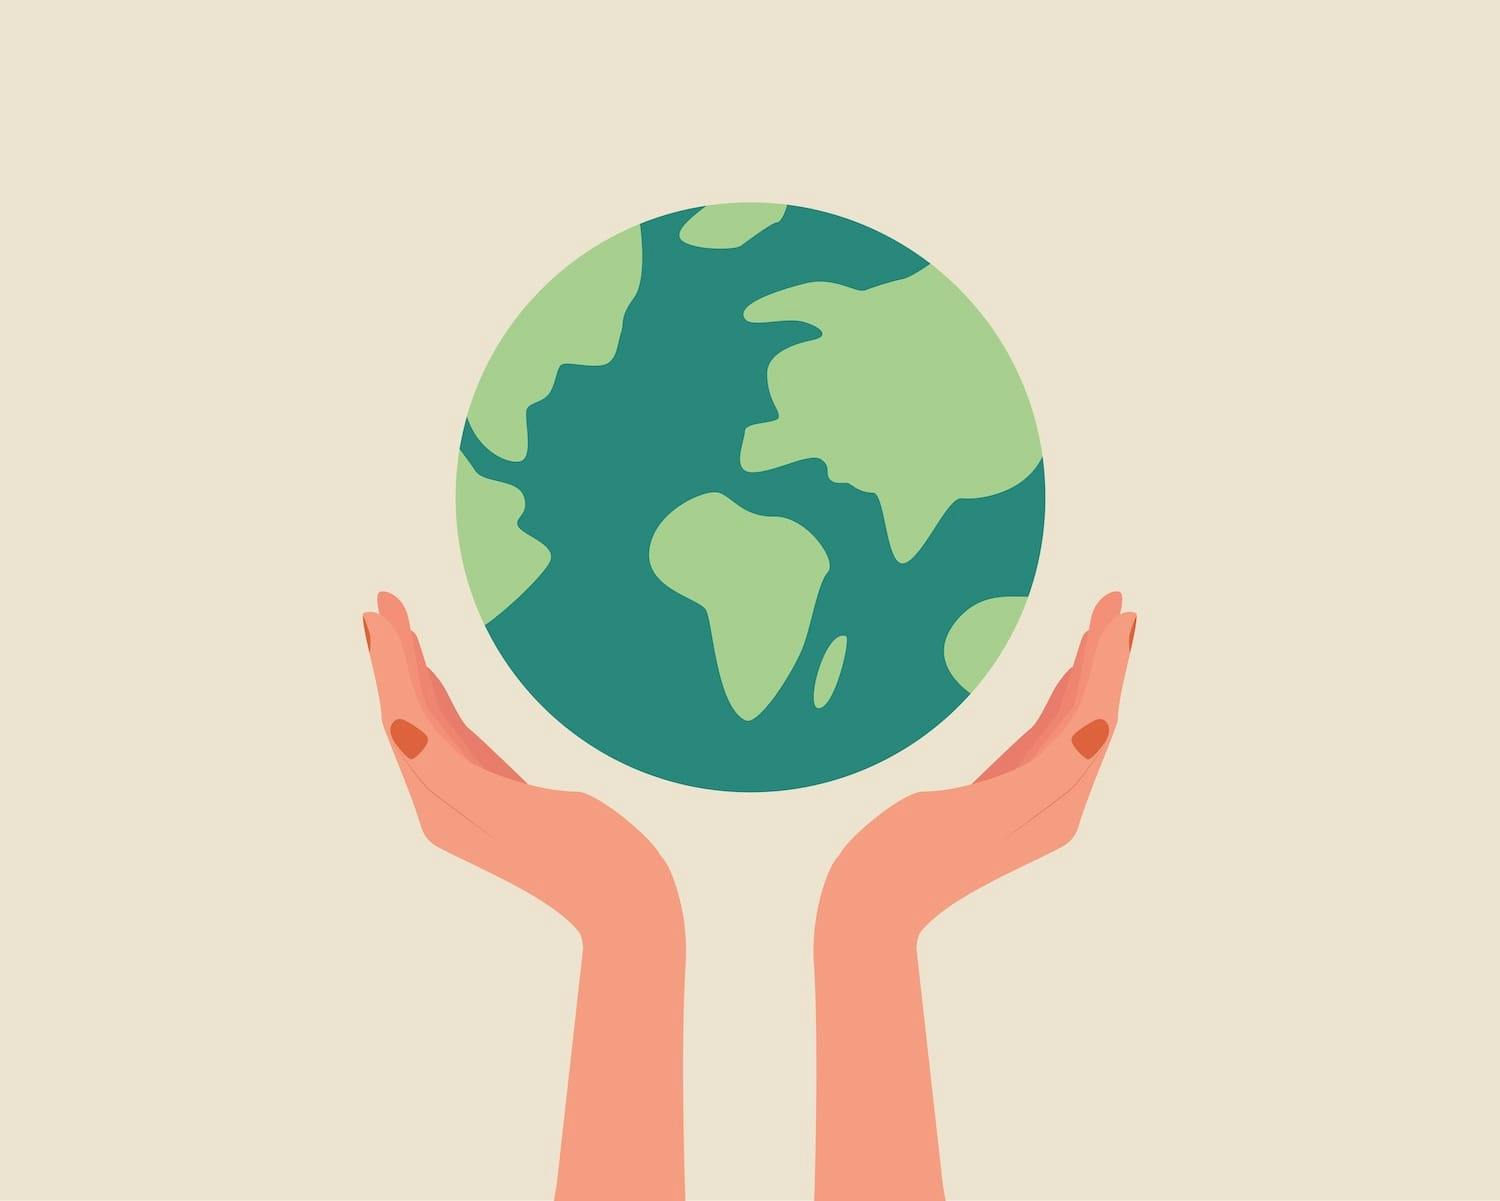 Image shows an illustration of hands holding Earth